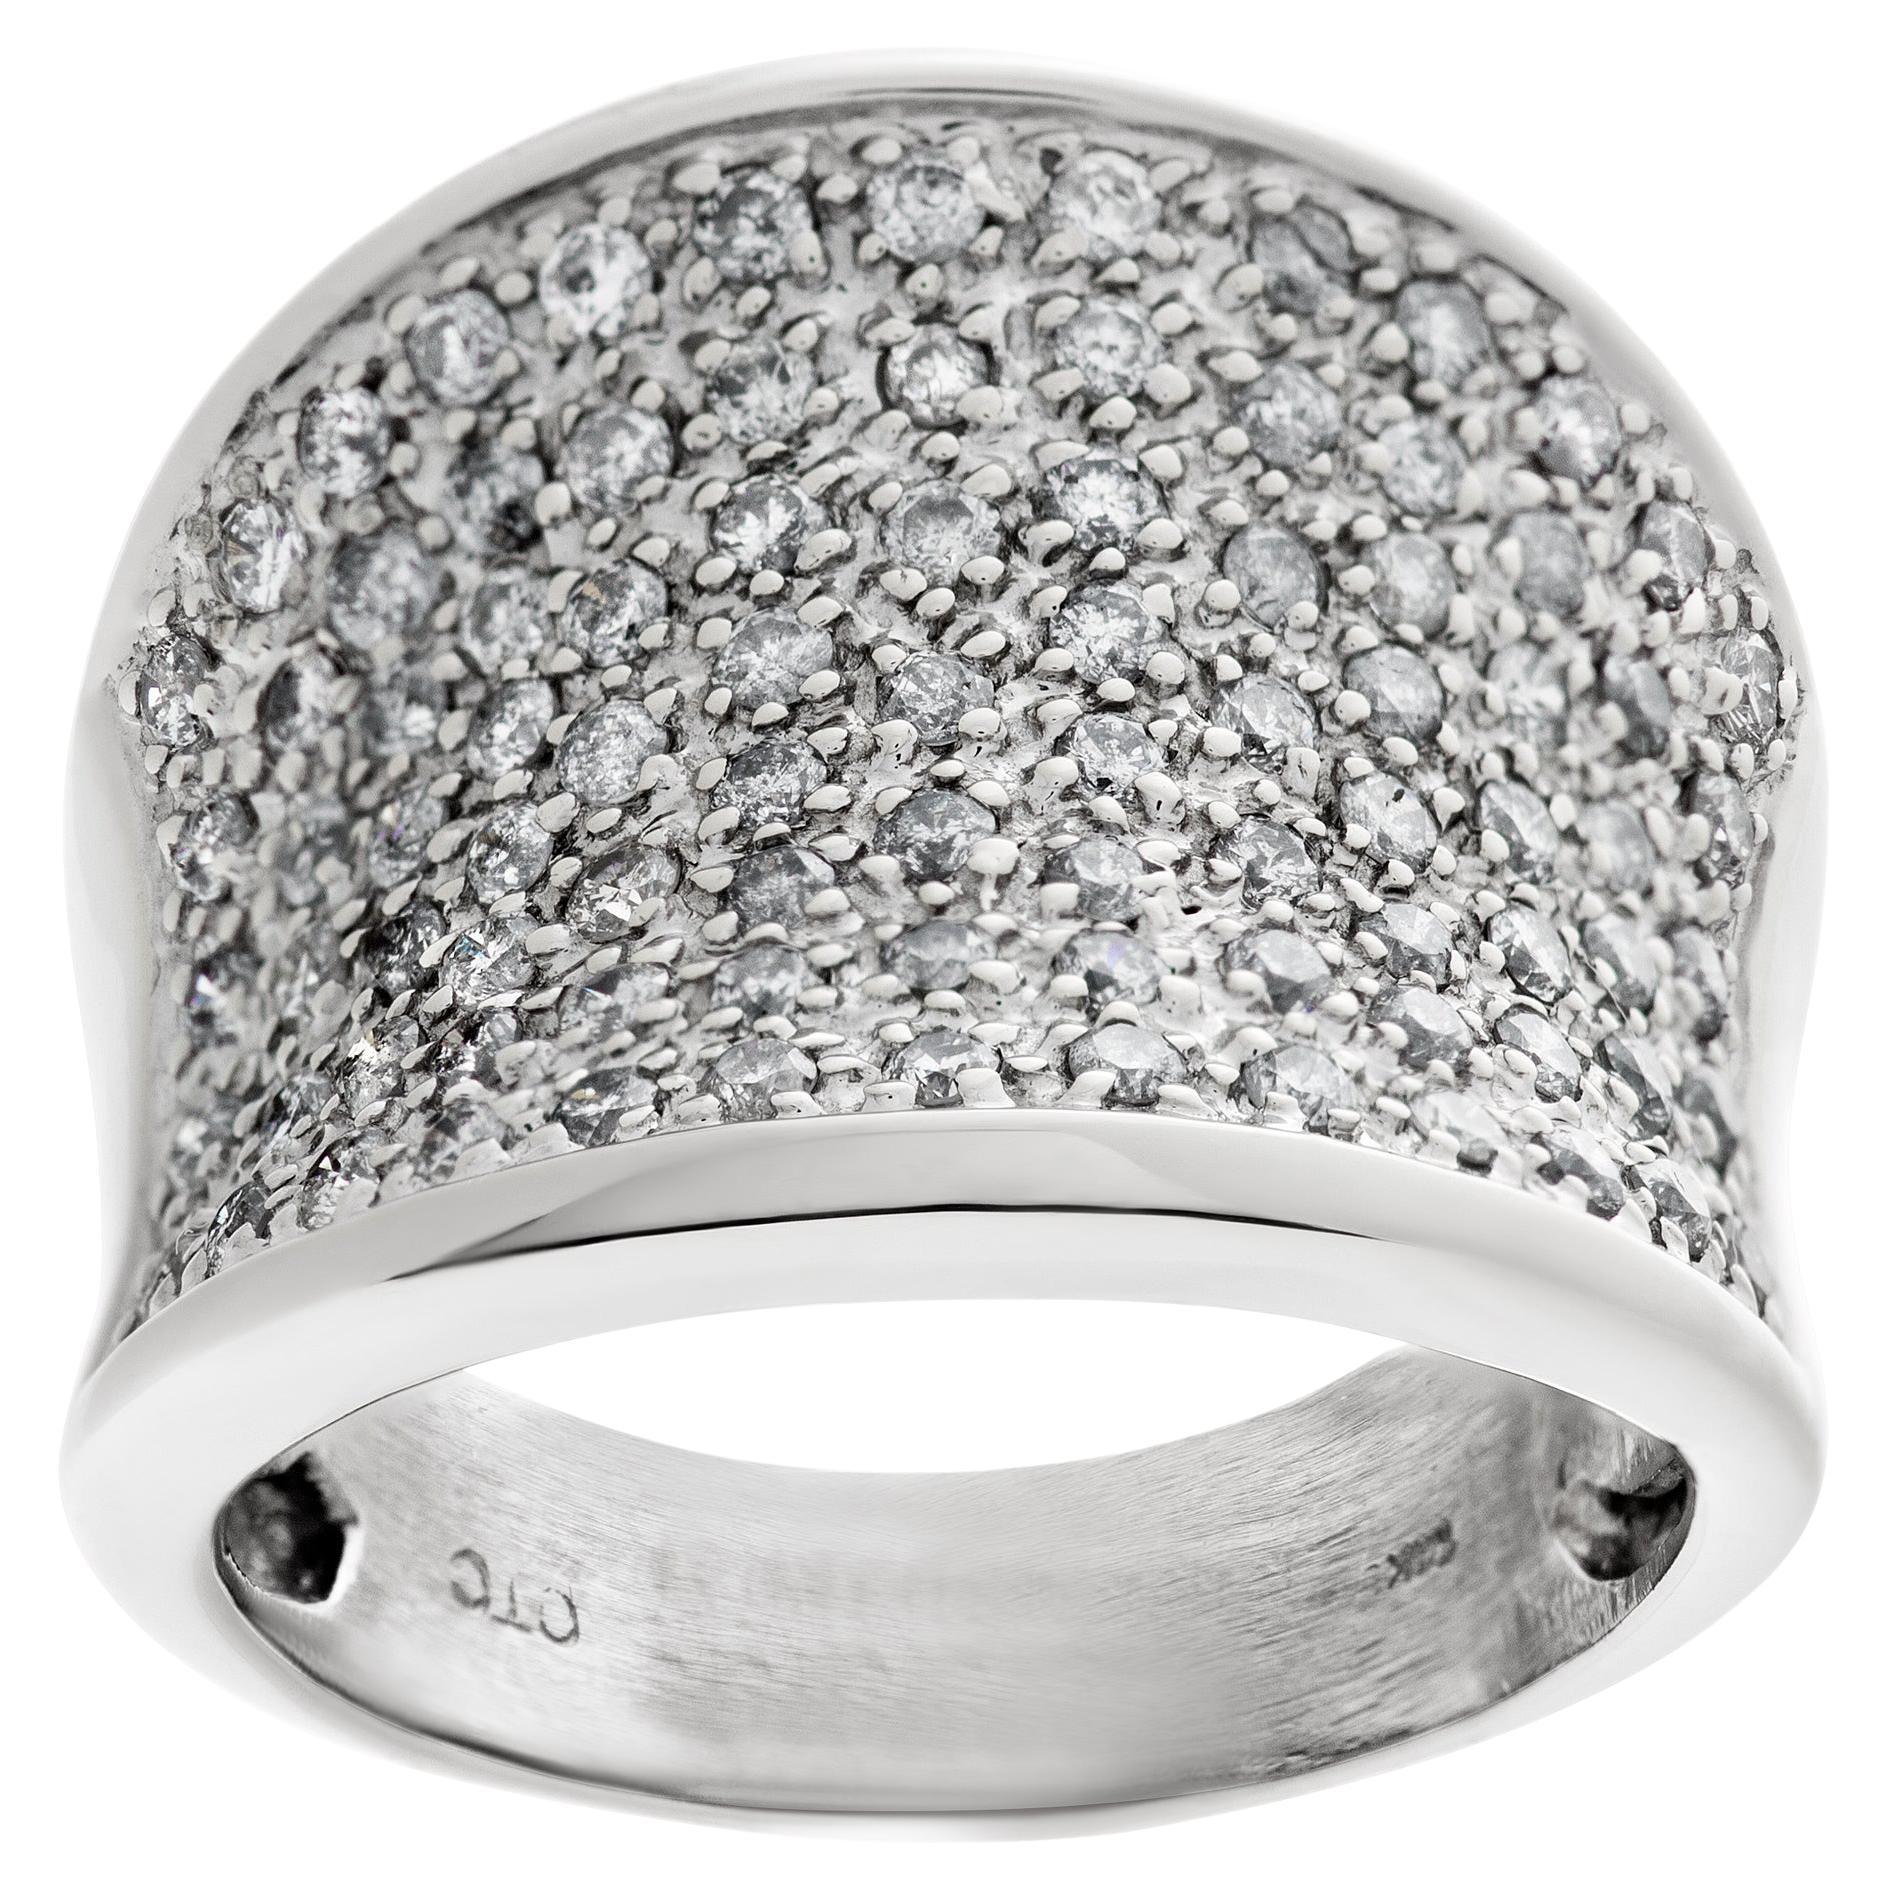 Pave diamond wide ring in 14k white gold For Sale